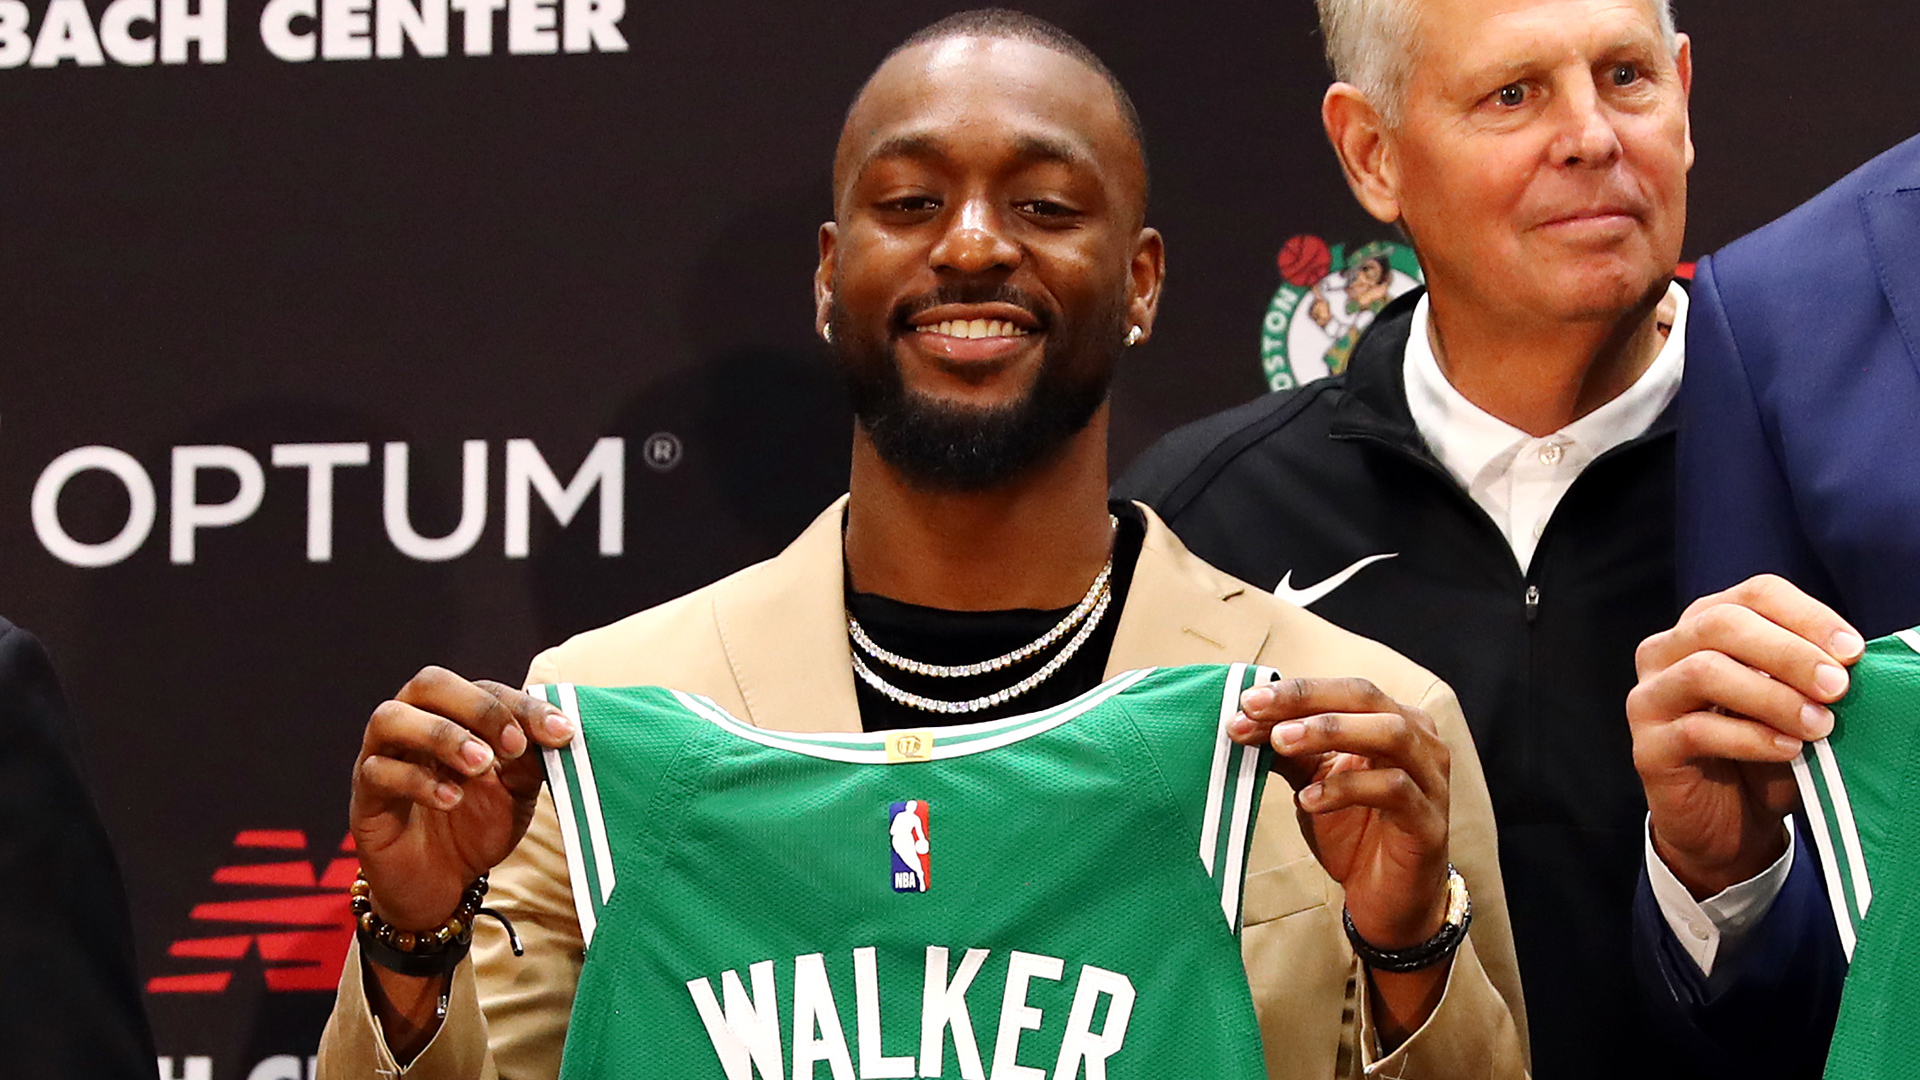 Kemba Walker has left the Charlotte Hornets for the Boston Celtics, but the All-Star guard still paid tribute to Michael Jordan.